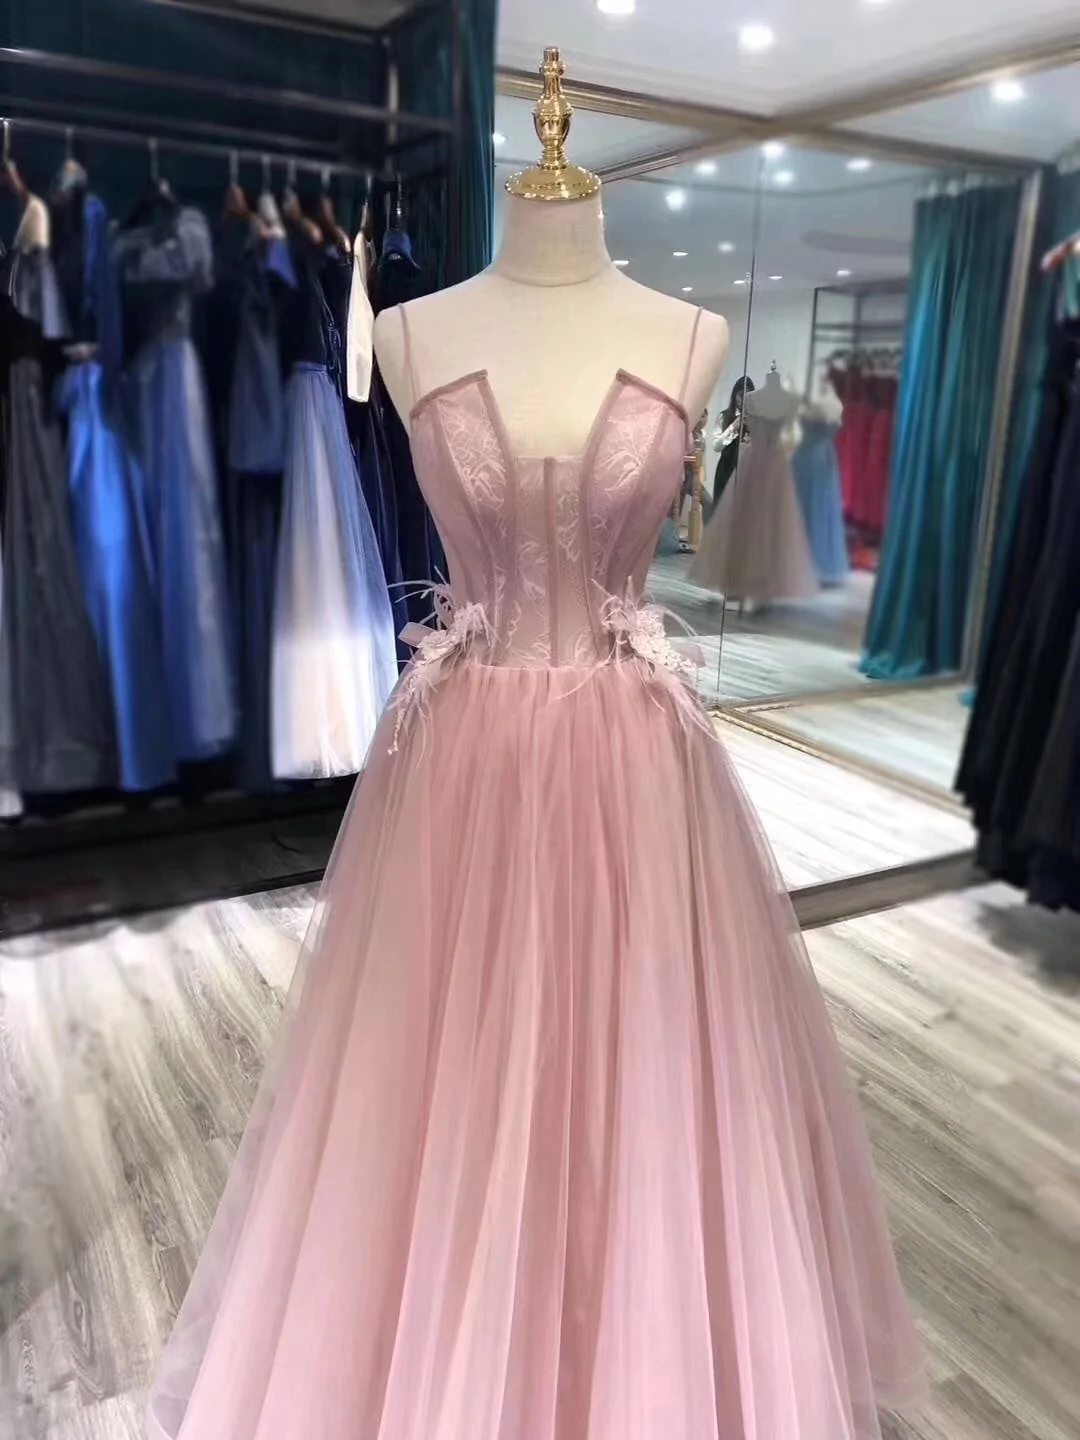 Charming Tulle Straps Long Formal Gown, Pink Elegant Party Dress gh2499